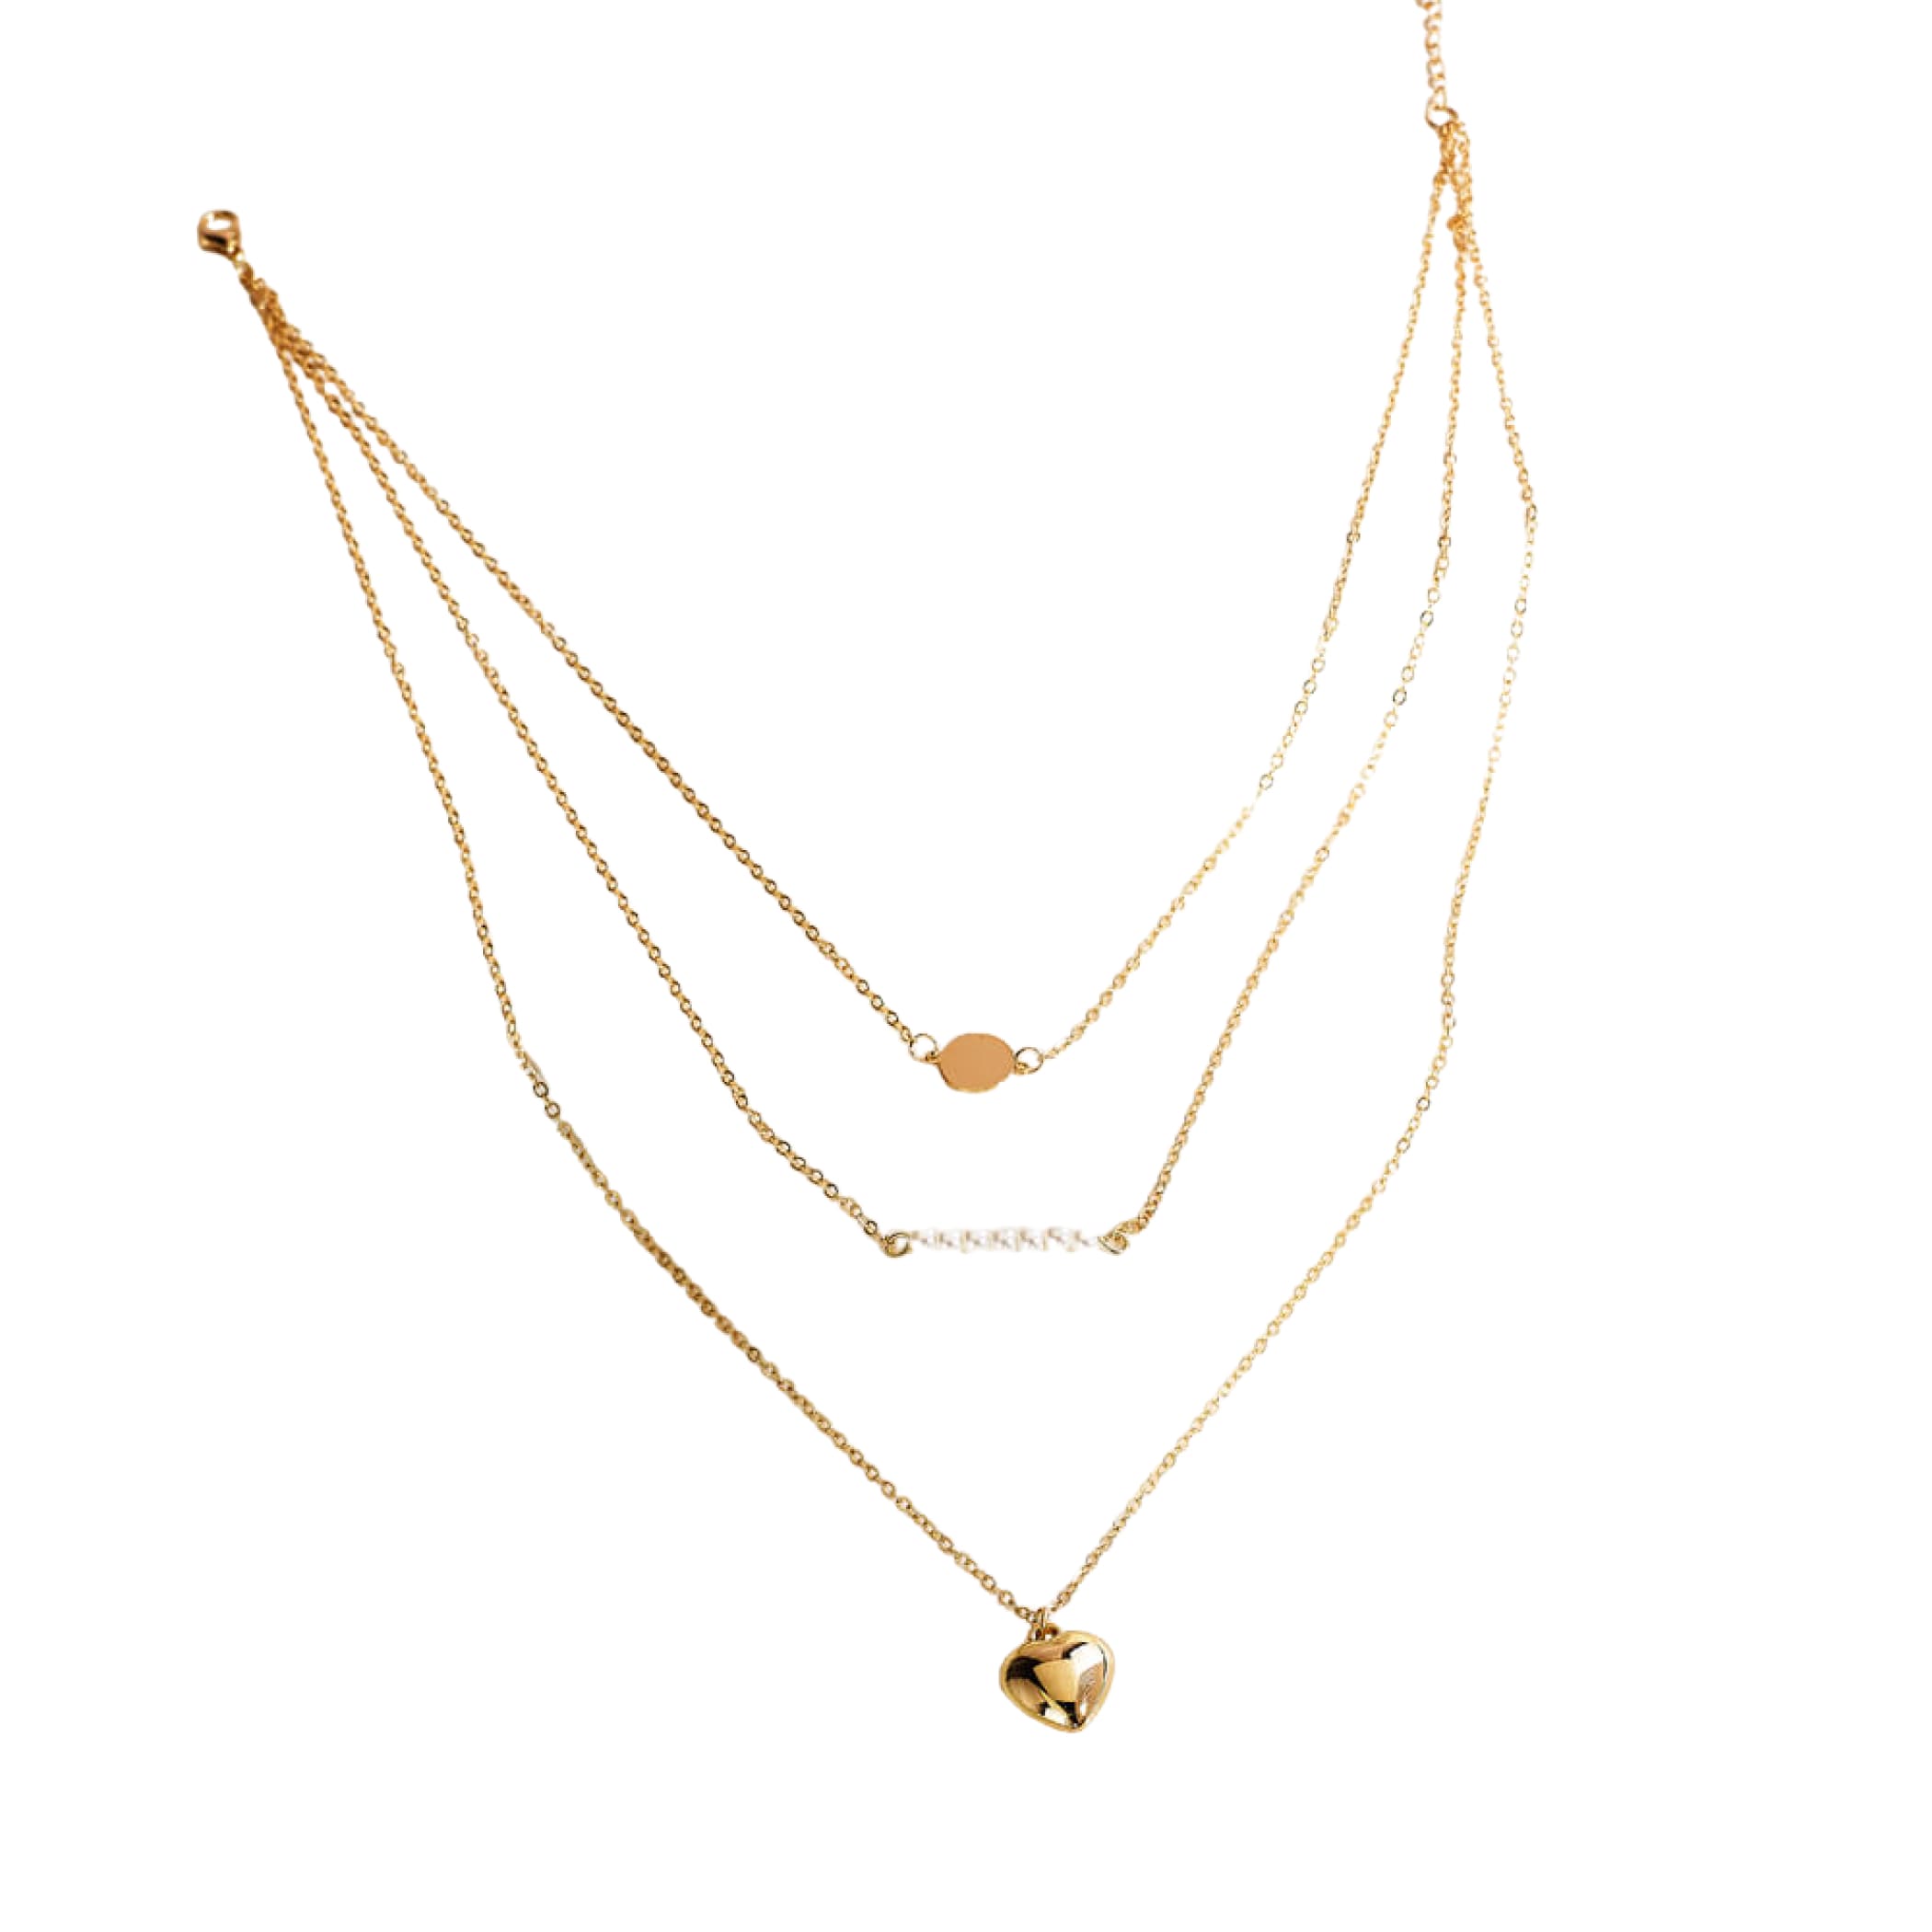 Triple layer pendant necklace with gold color chain cross